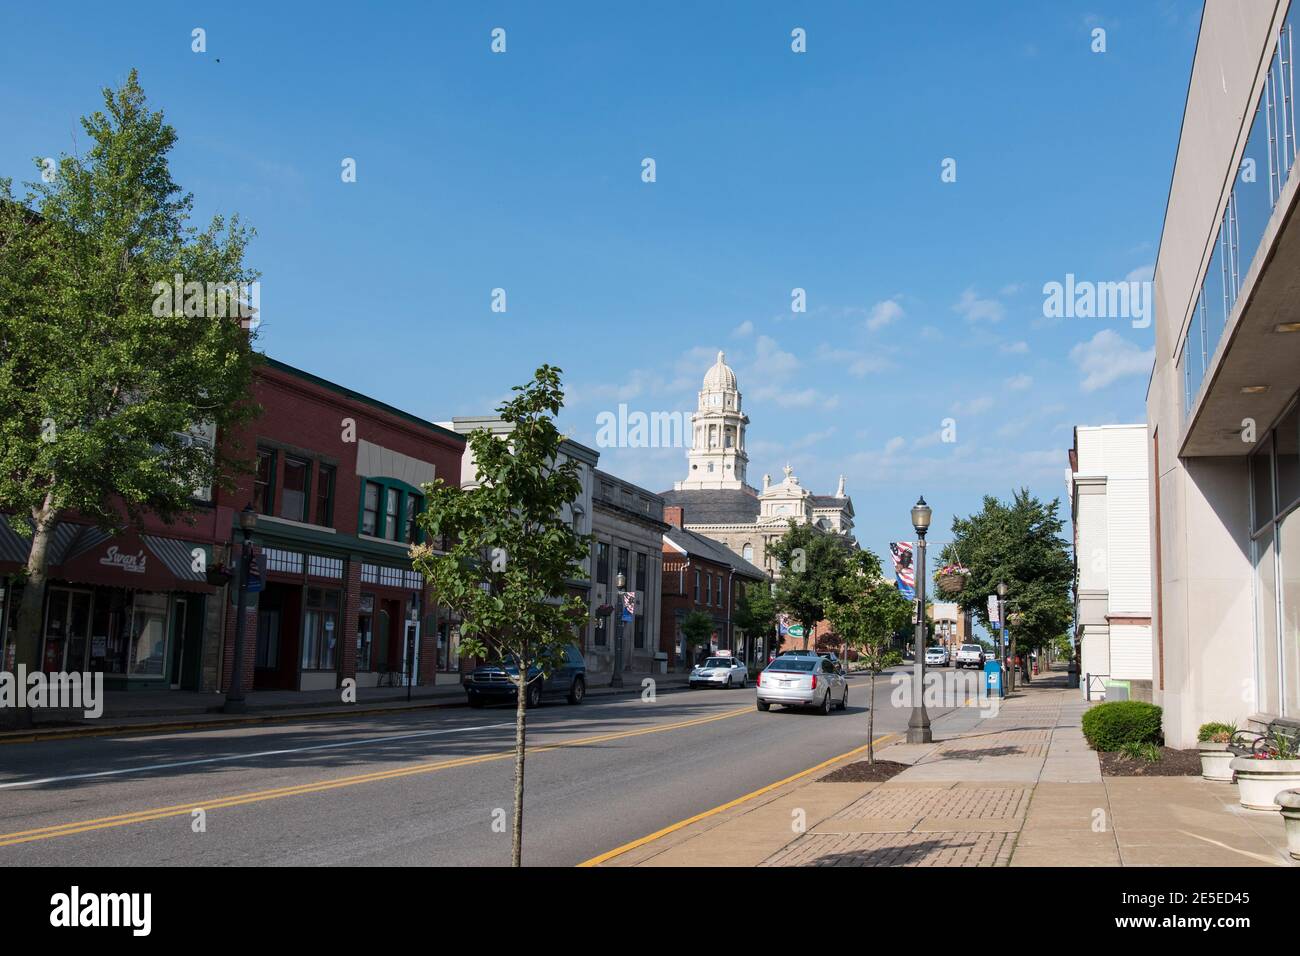 St. Clairsville, Ohio/USA-June 7, 2018: Historic Main Street in St. Clairsville with the Belmont County Courthouse visible in the distance. Stock Photo